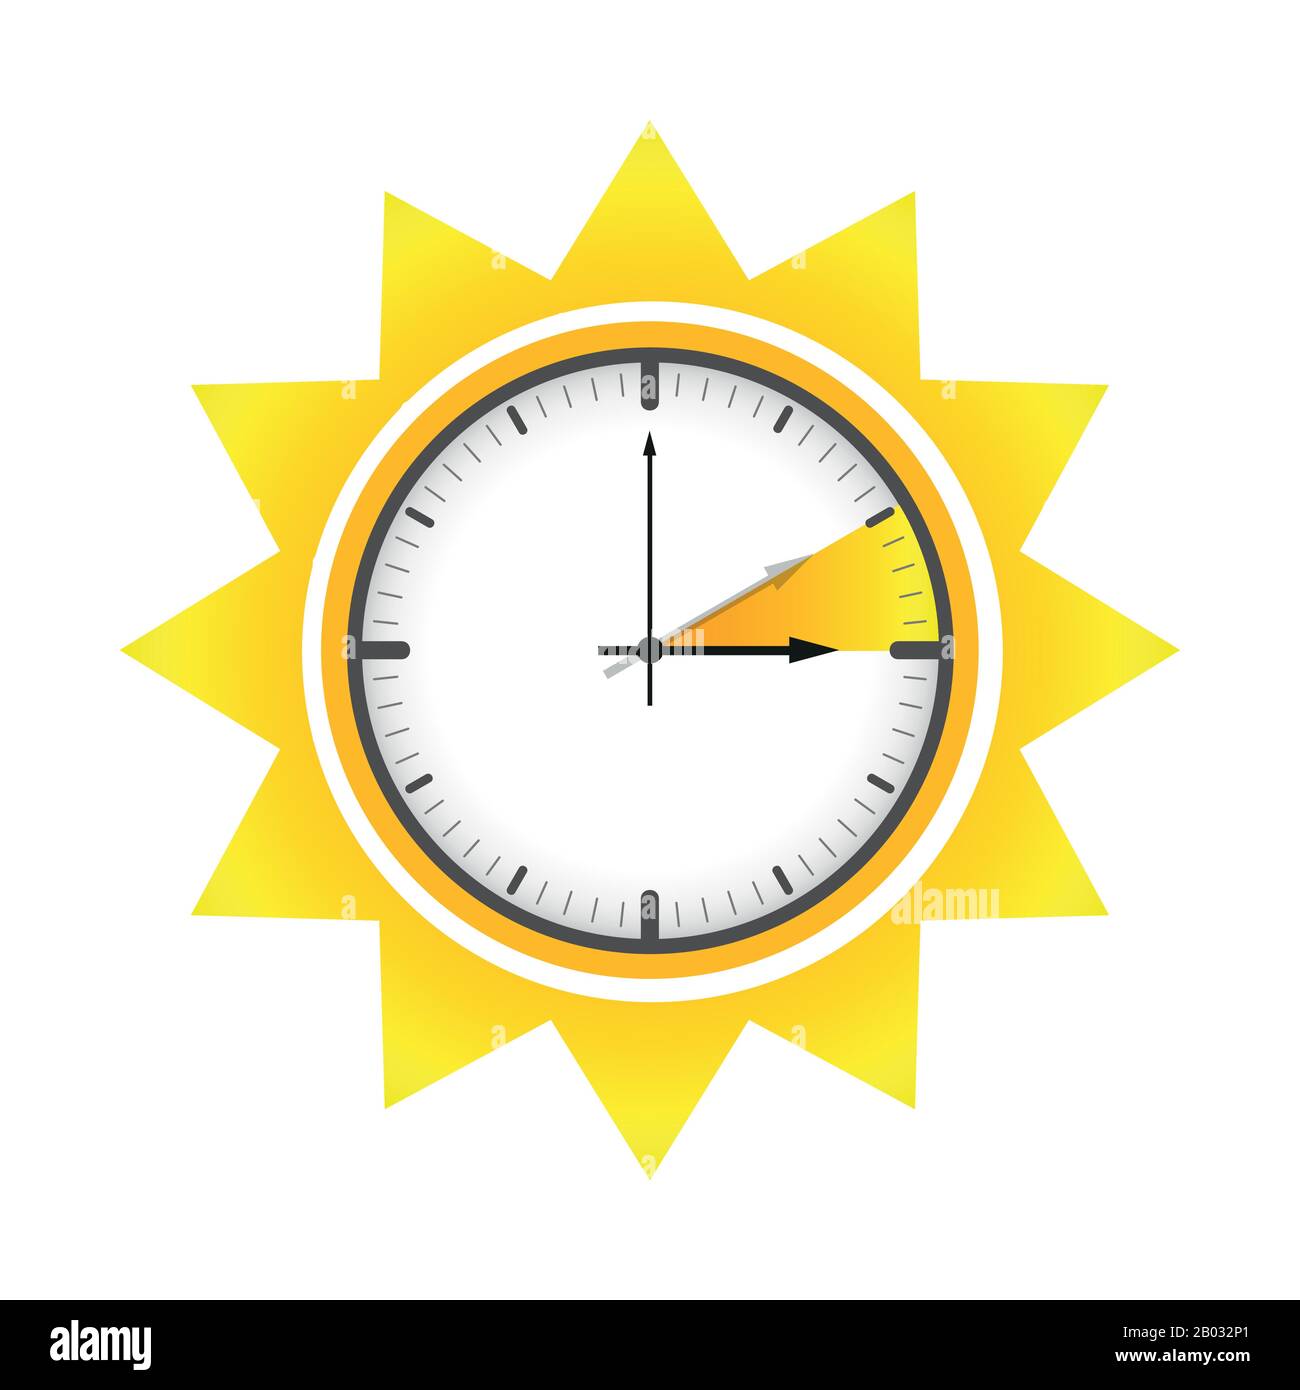 Daylight Saving Time. Change clock to summer time. Stock Photo by  ©FreedomMaster 185404958